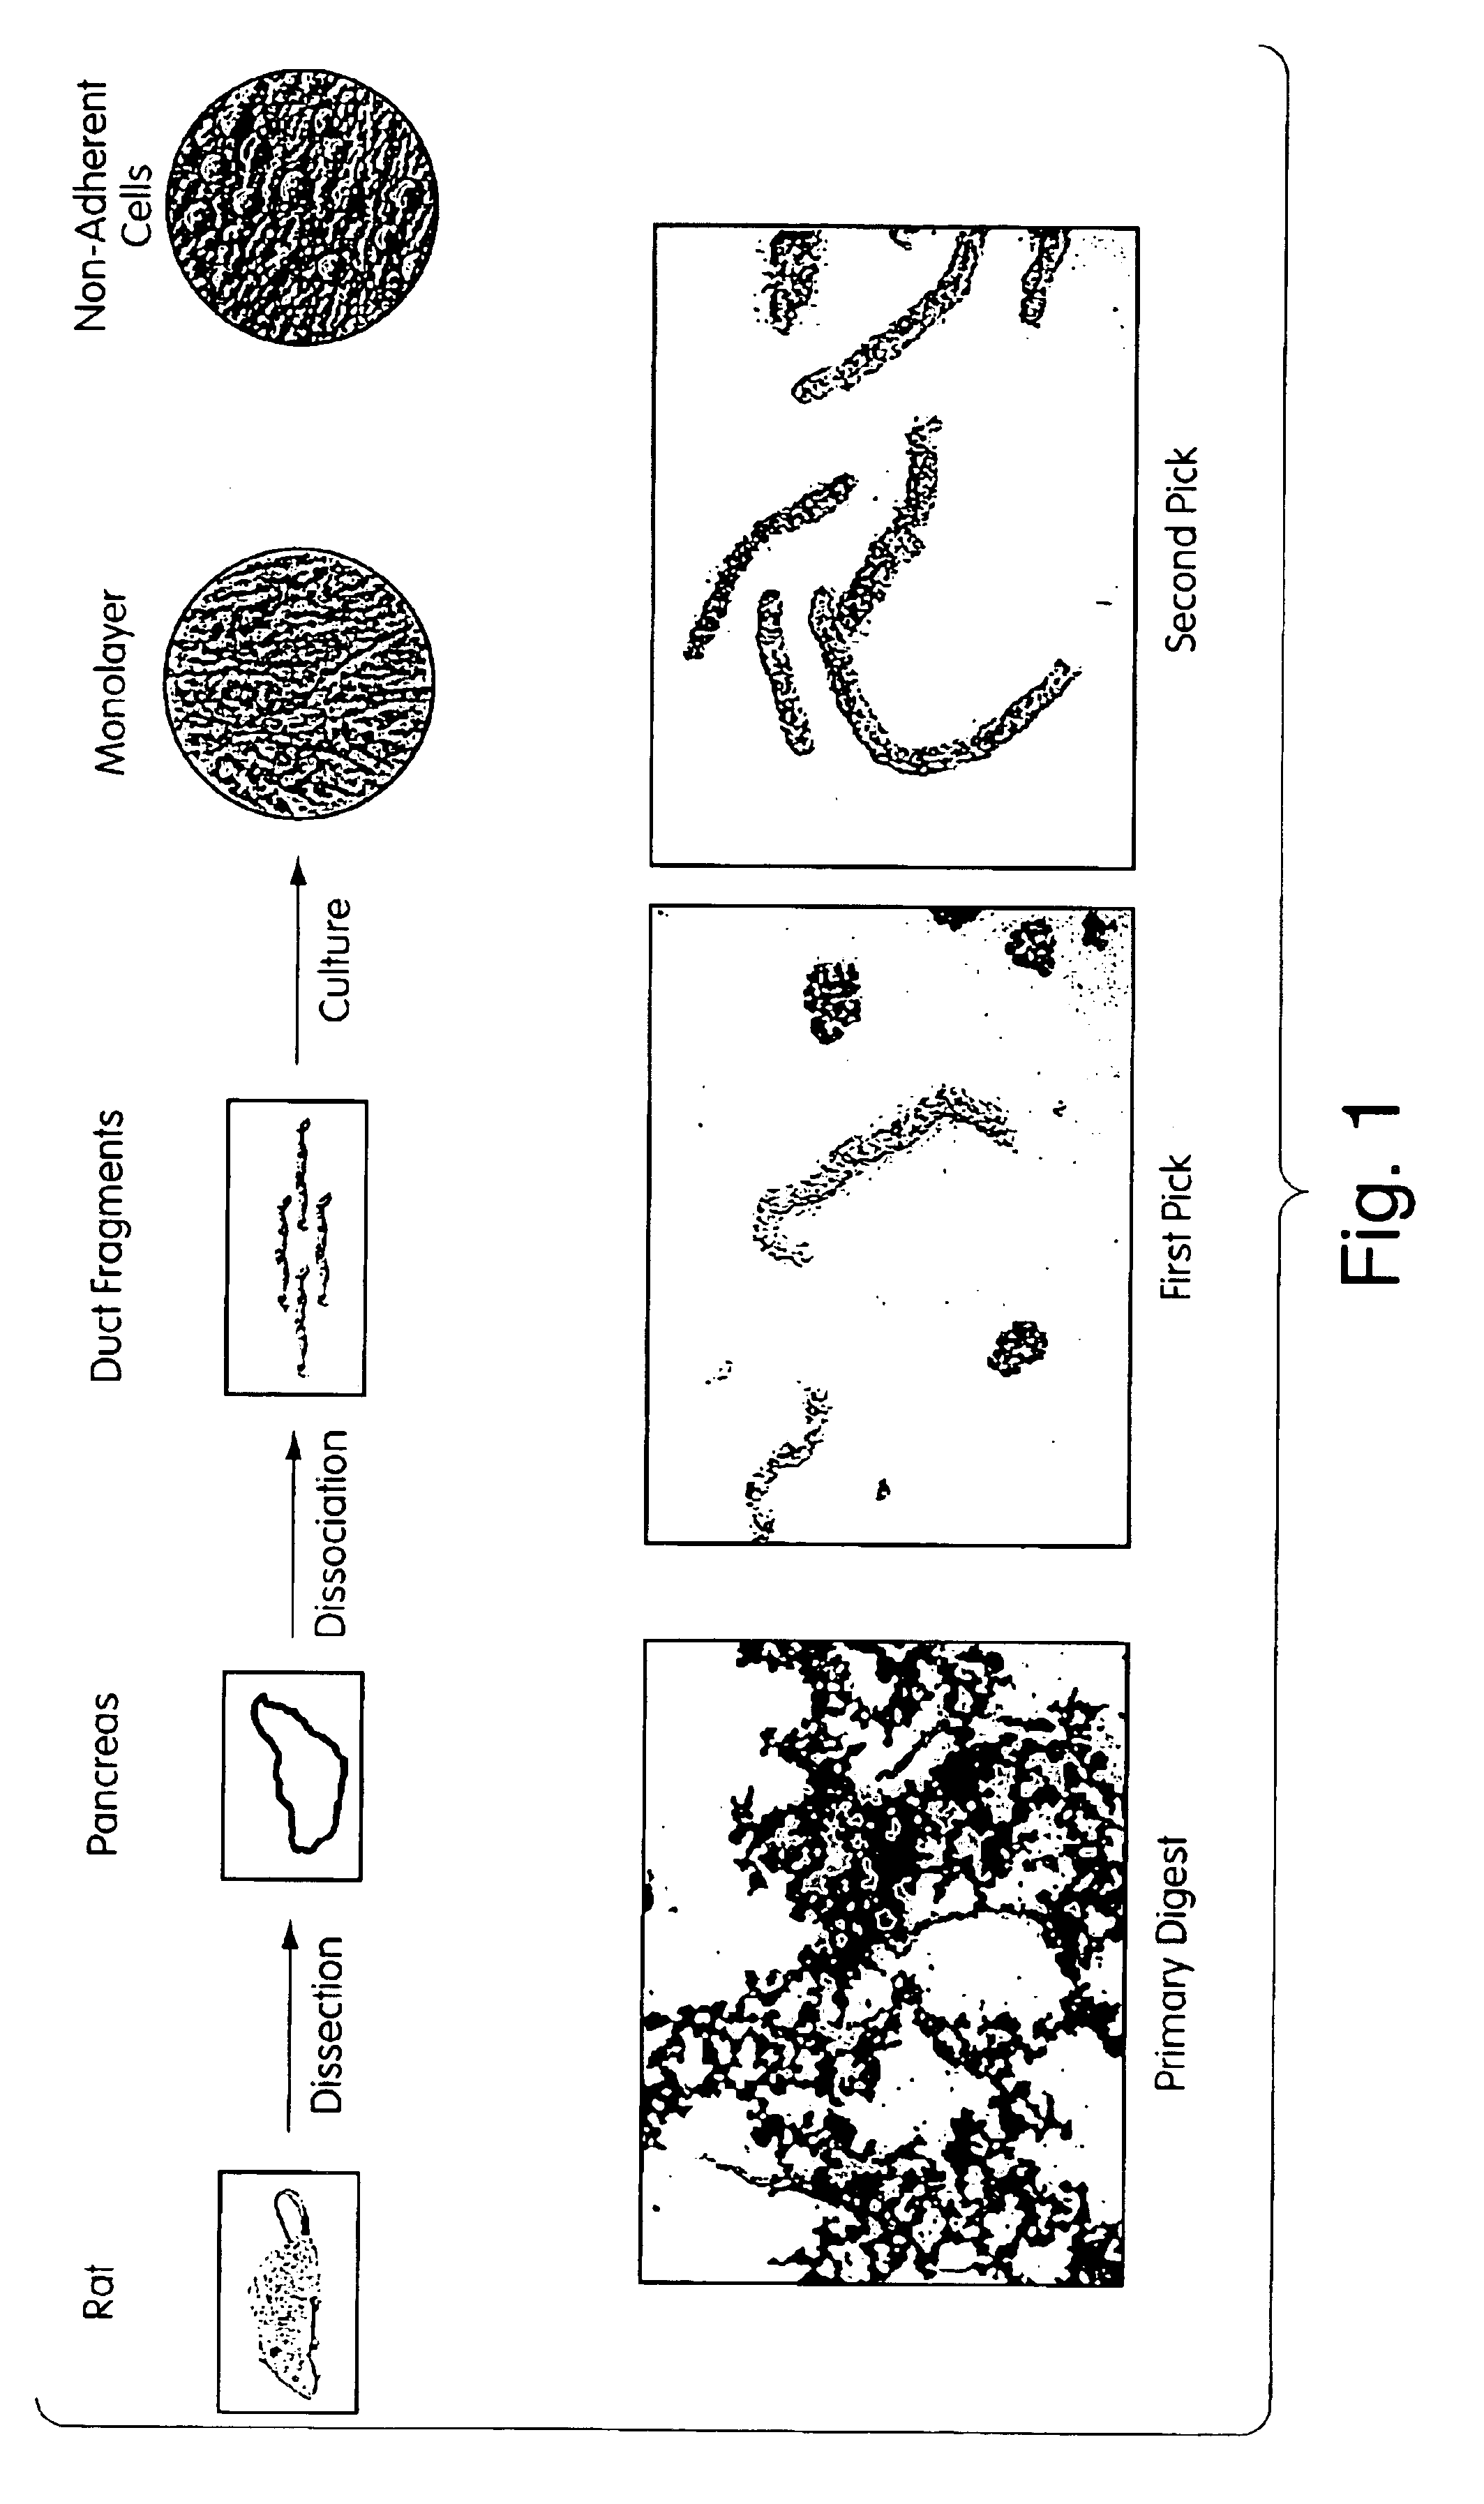 Progenitor cells, methods and uses related thereto